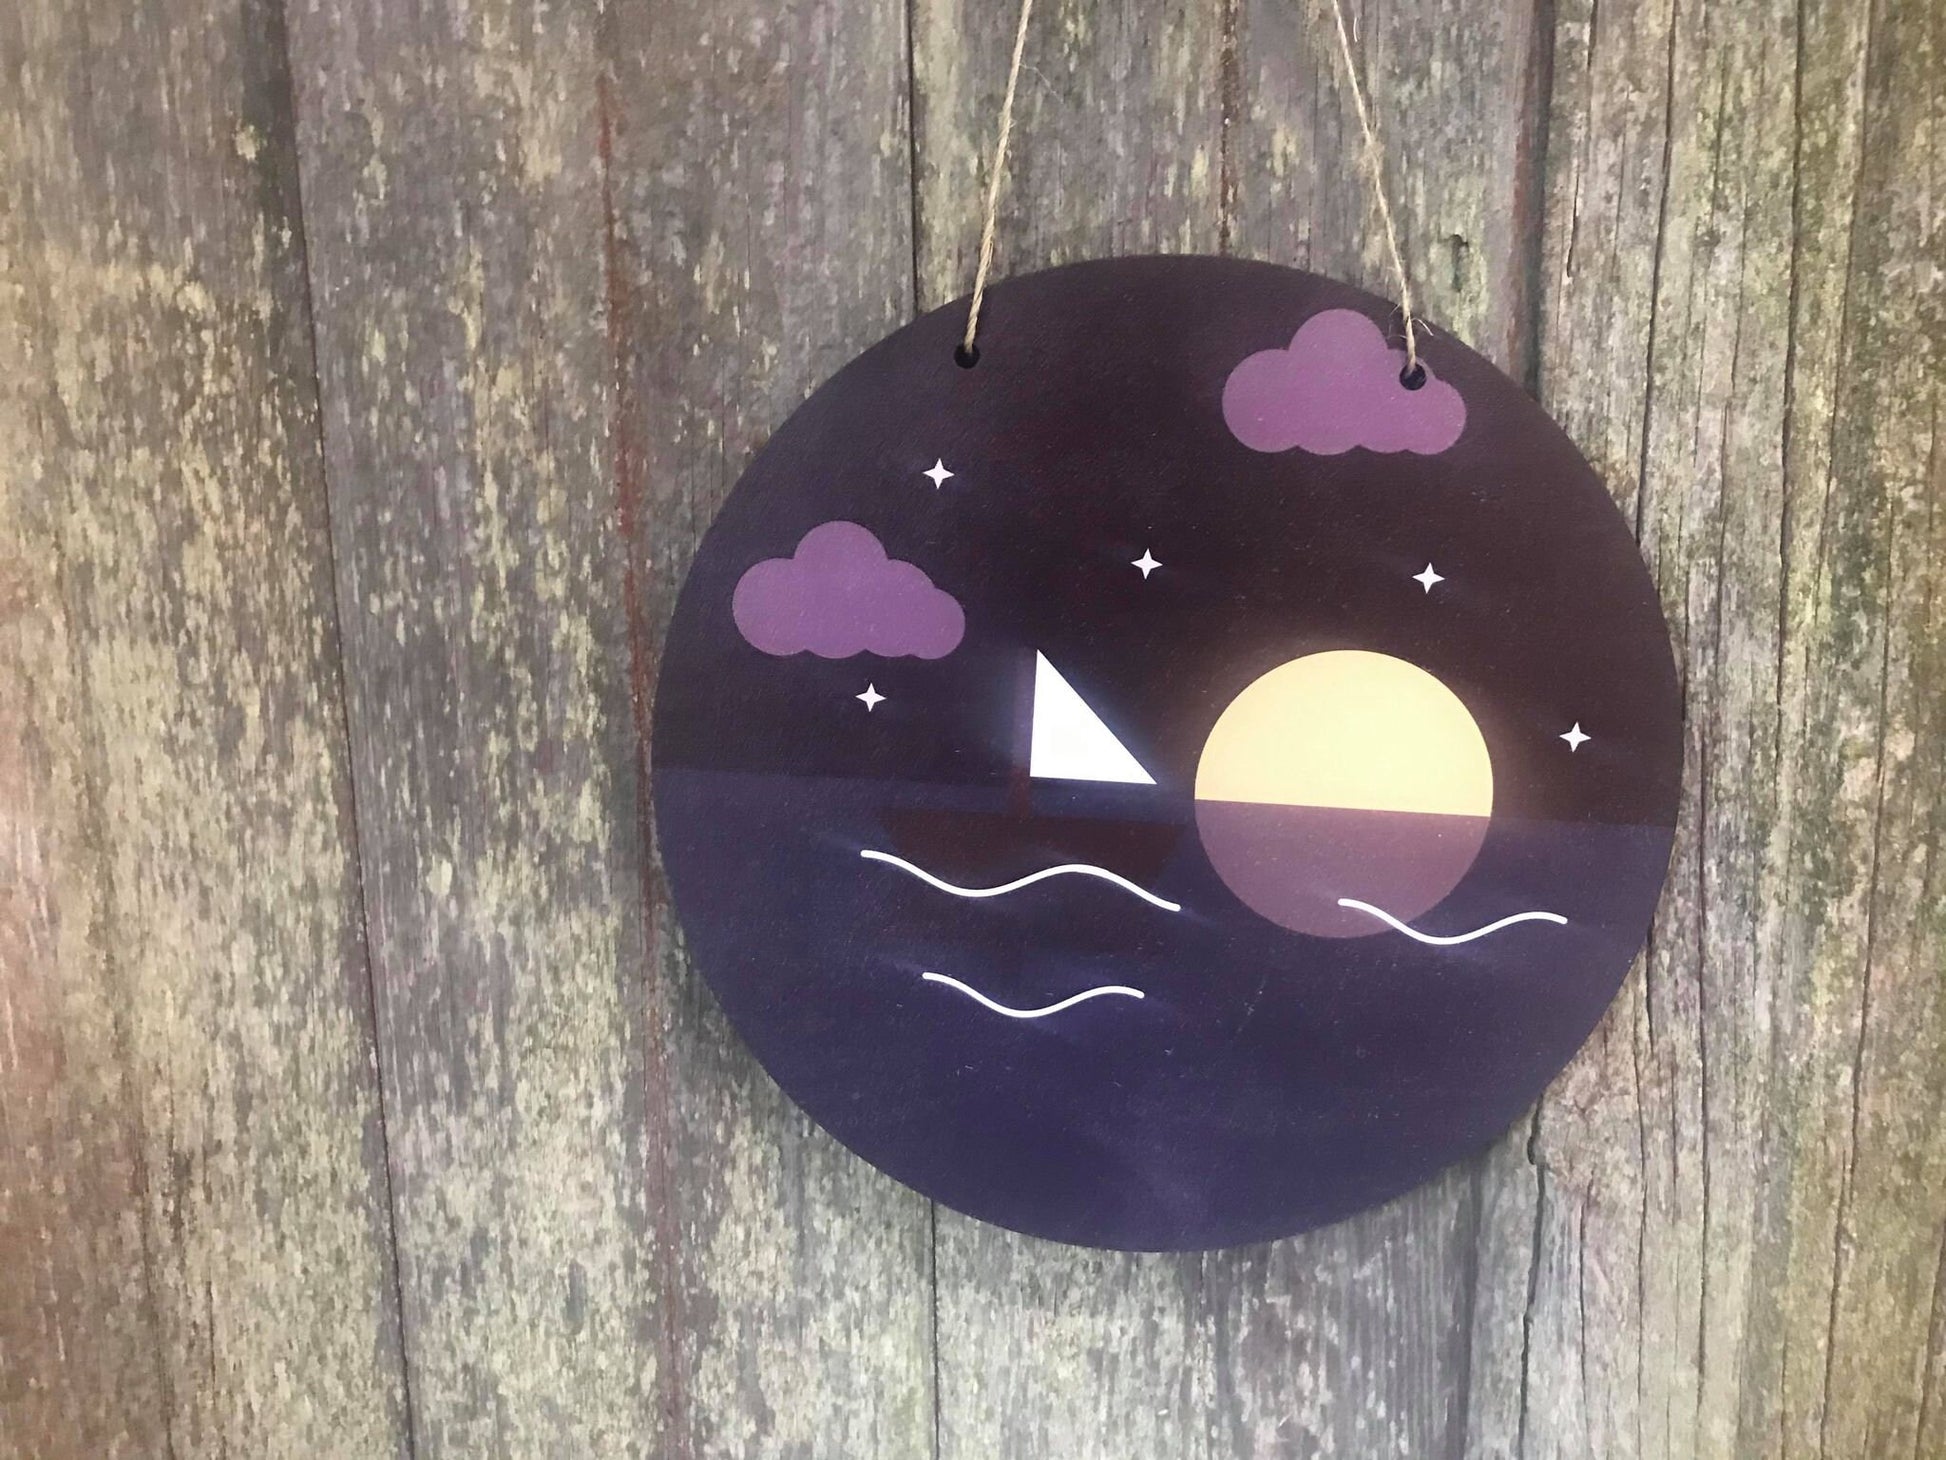 Ocean Purple Night Time Sign Round Sailboat Scenic Beach Water Wood Sky Wall Hanger Nursery Decor Plaque Wall Art Color Wood Print